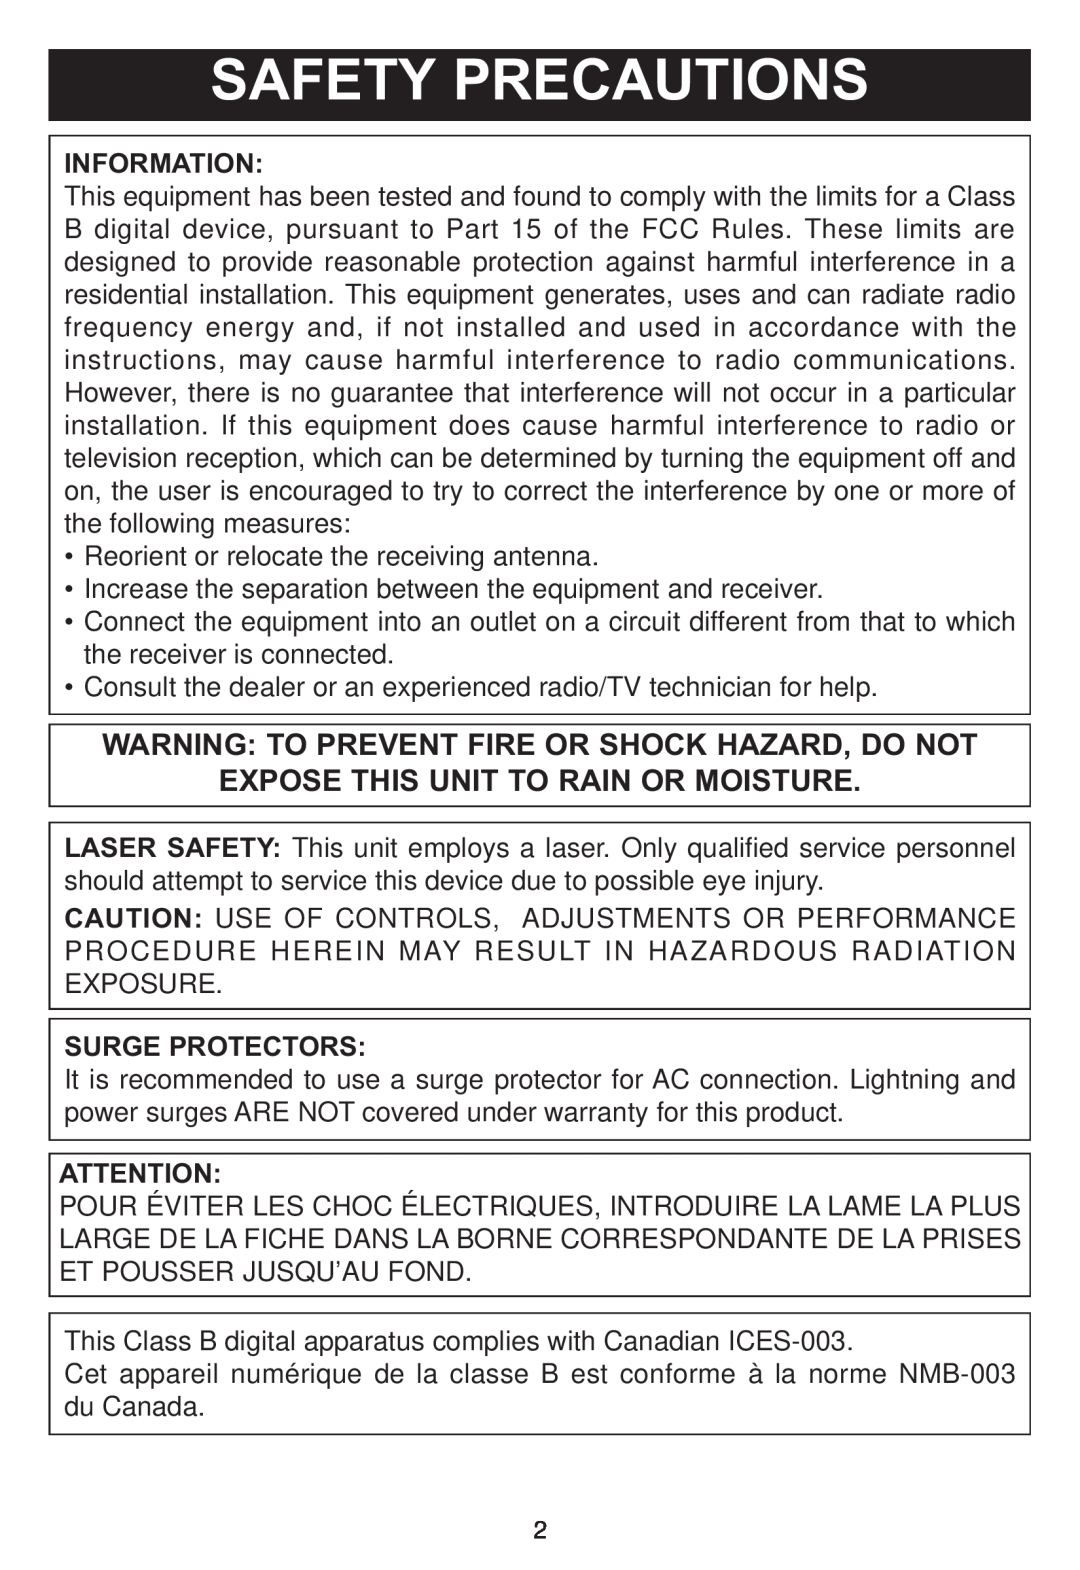 Memorex MP4047 manual Warning To Prevent Fire Or Shock Hazard, Do Not, Expose This Unit To Rain Or Moisture, Information 